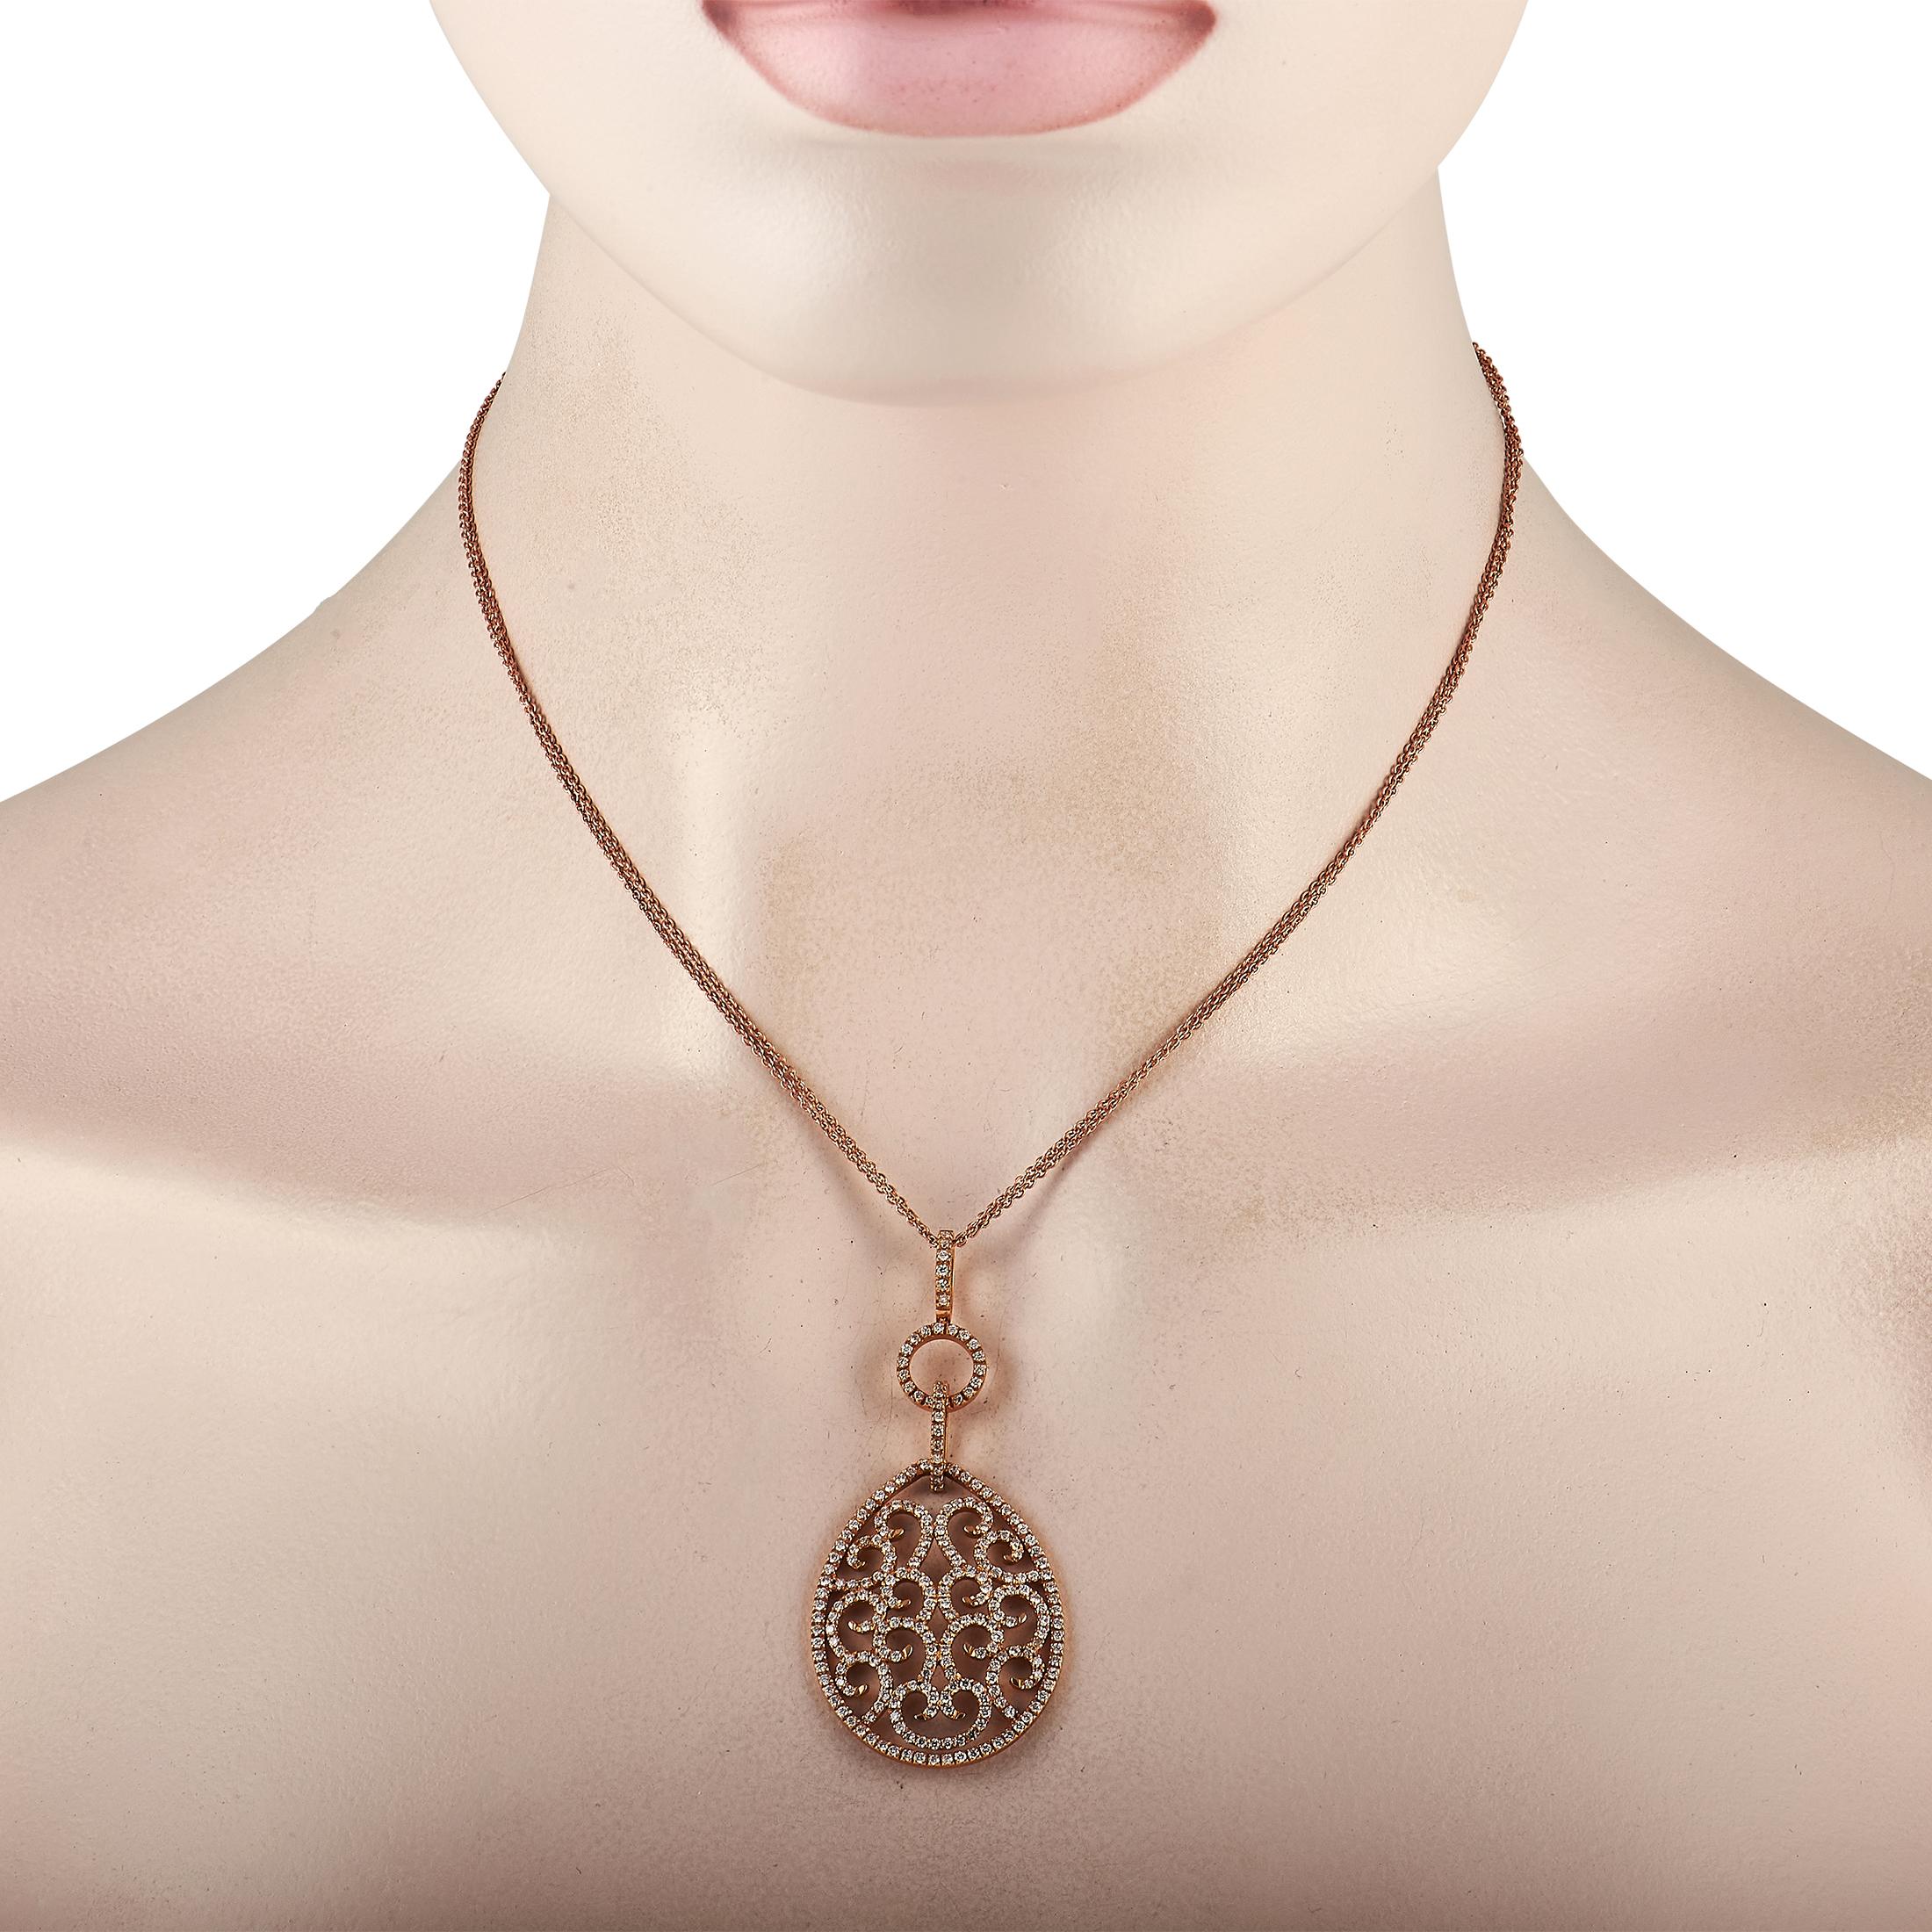 A gorgeous rose gold diamond necklace to add to your collection. On a 16-inch rose gold double cable chain is a 2.45